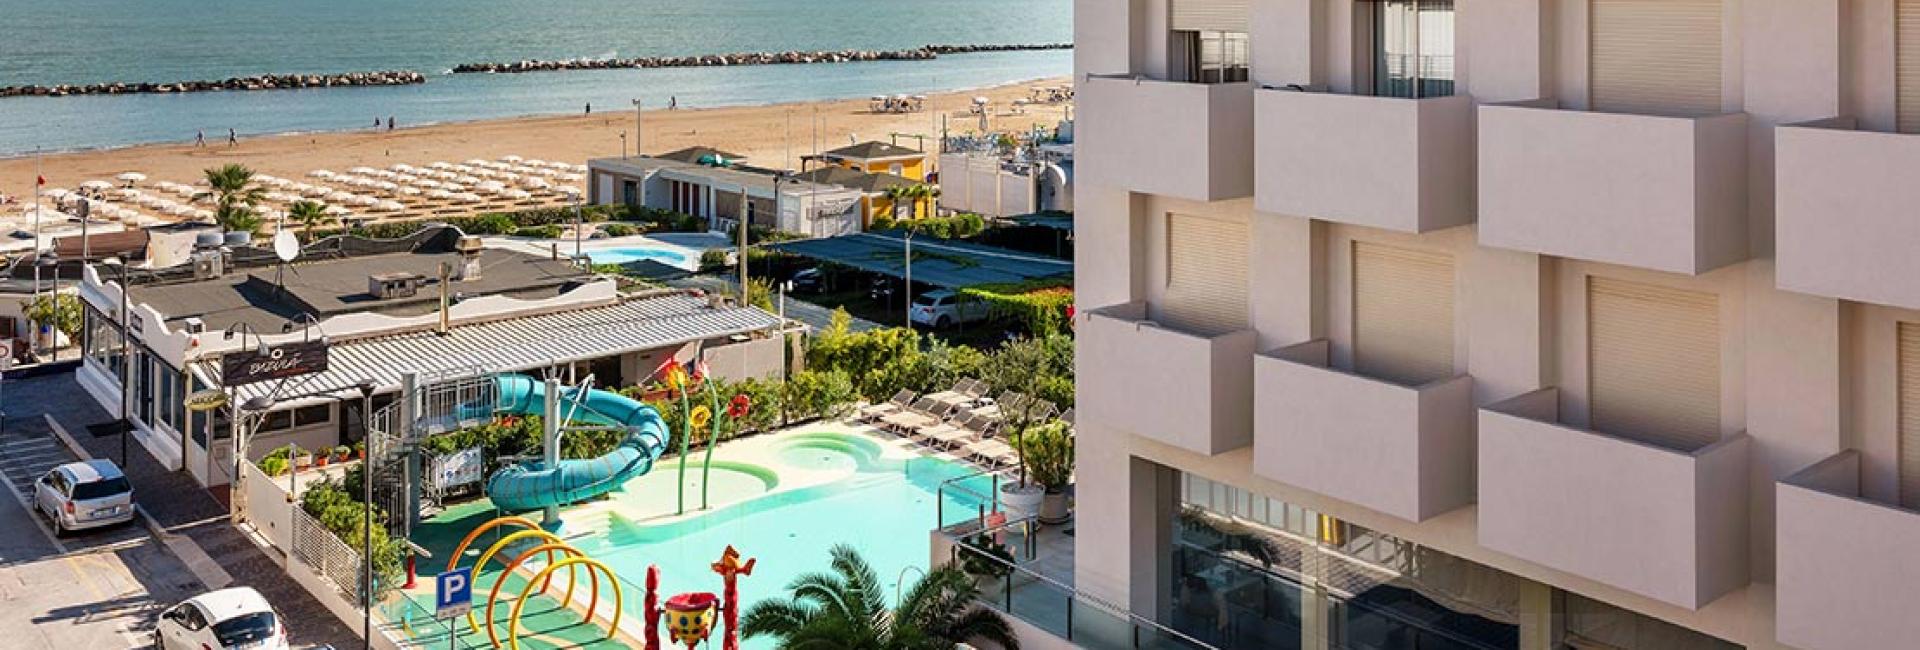 cattolicafamilyresort fr offre-paques-a-la-mer-a-cattolica 011